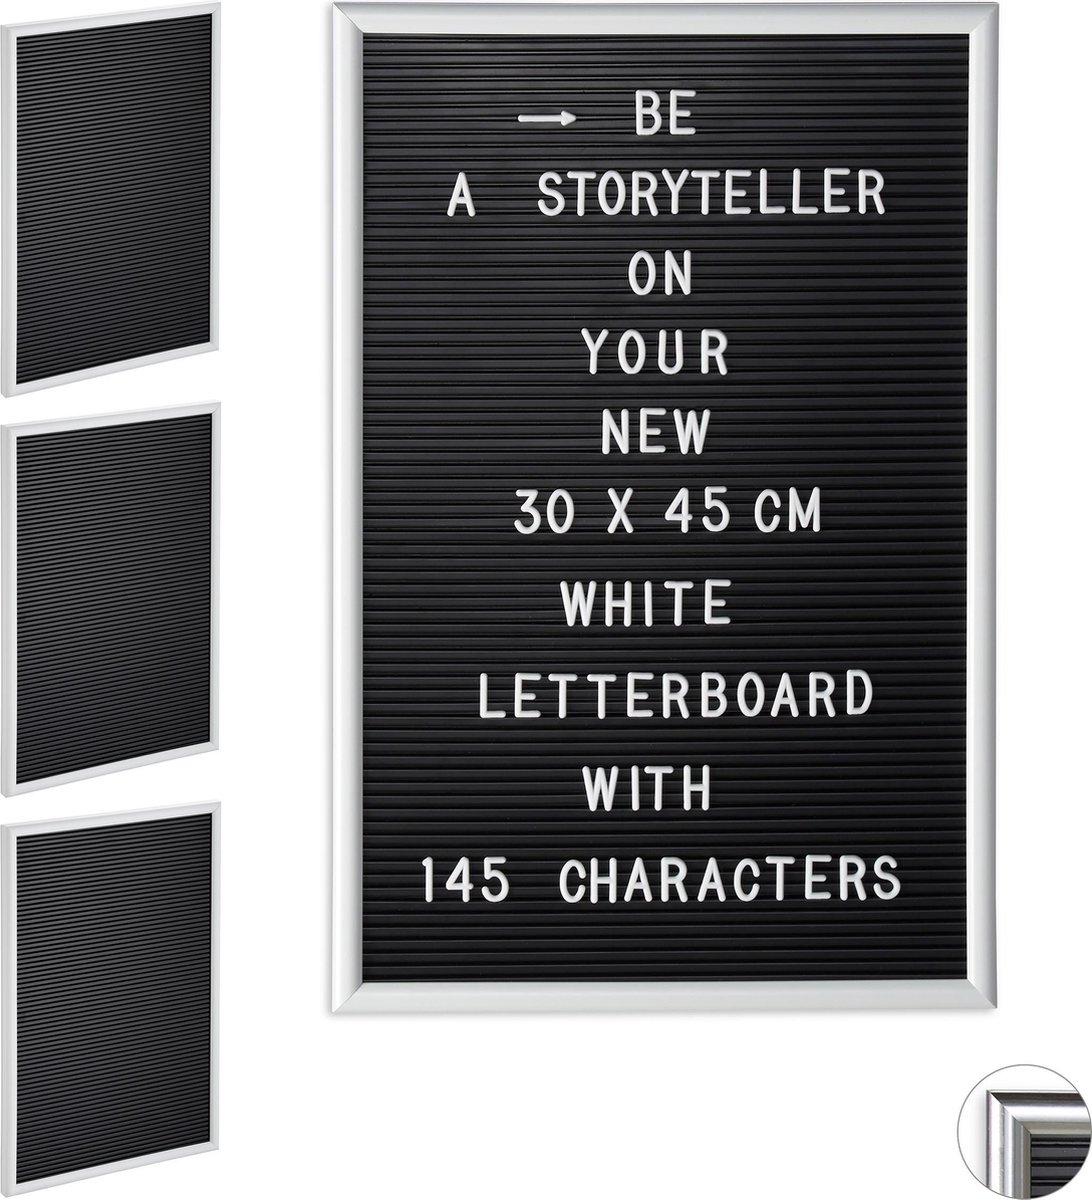 Relaxdays 4x letterbord 30x45 decoratie letter board bord voor letters wit